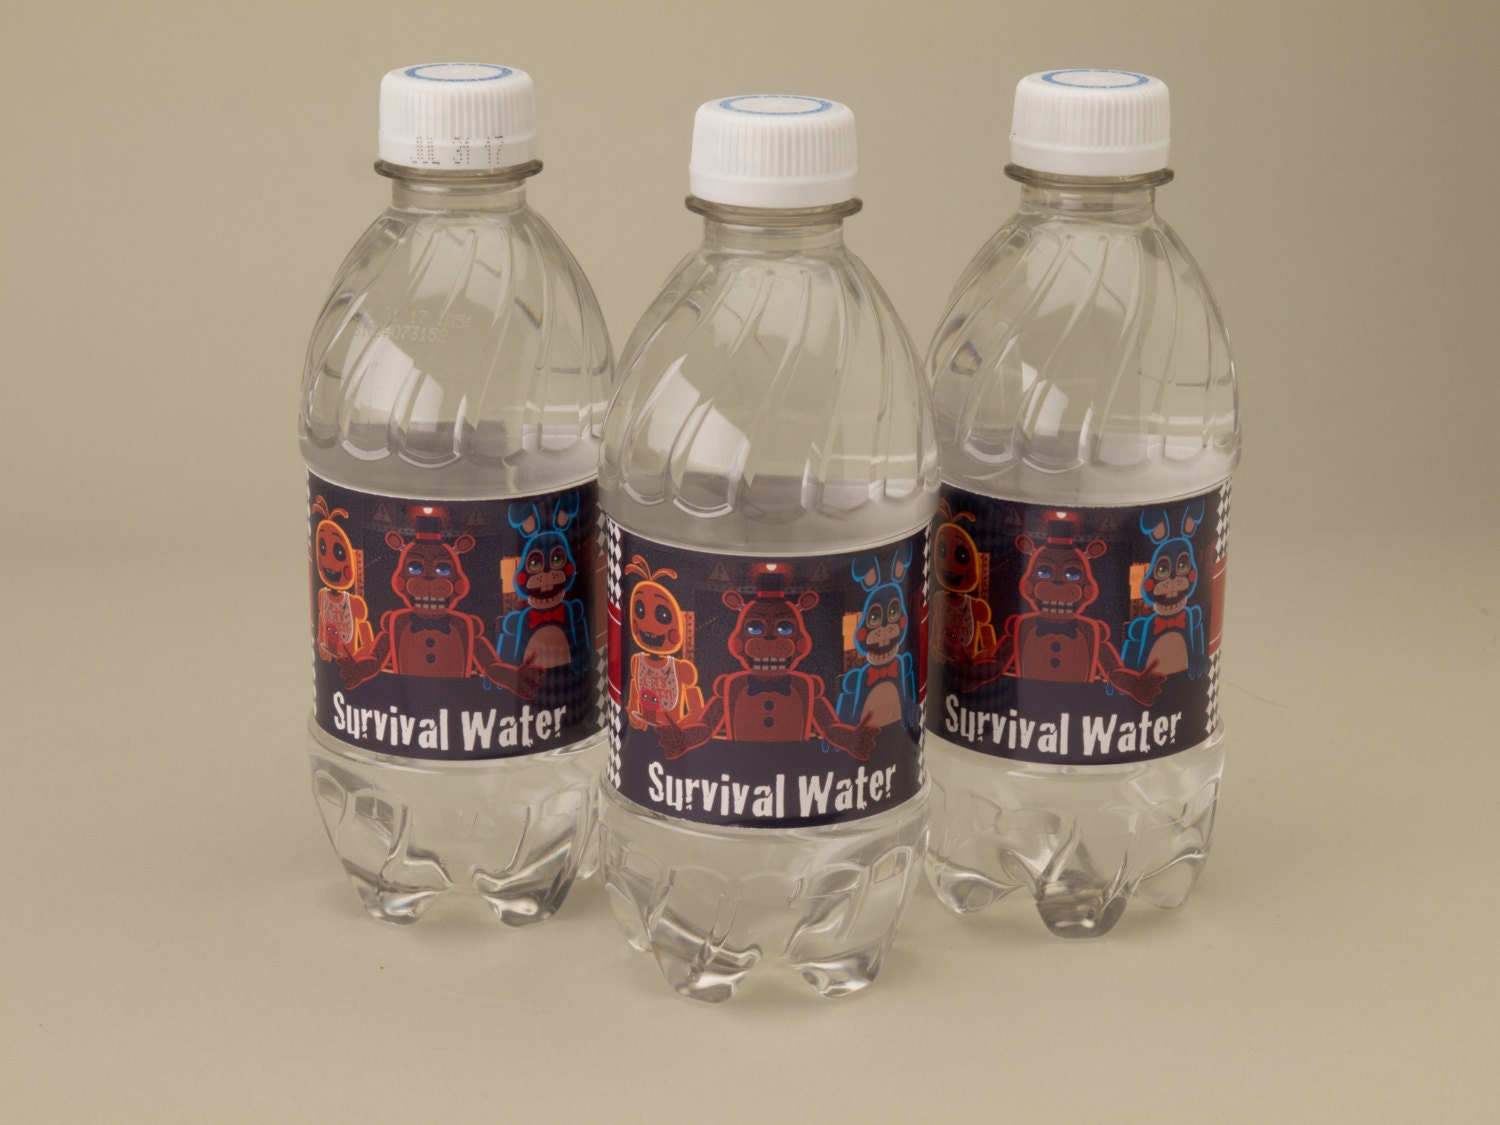 Five Nights At Freddy's Toys Print Water Bottle